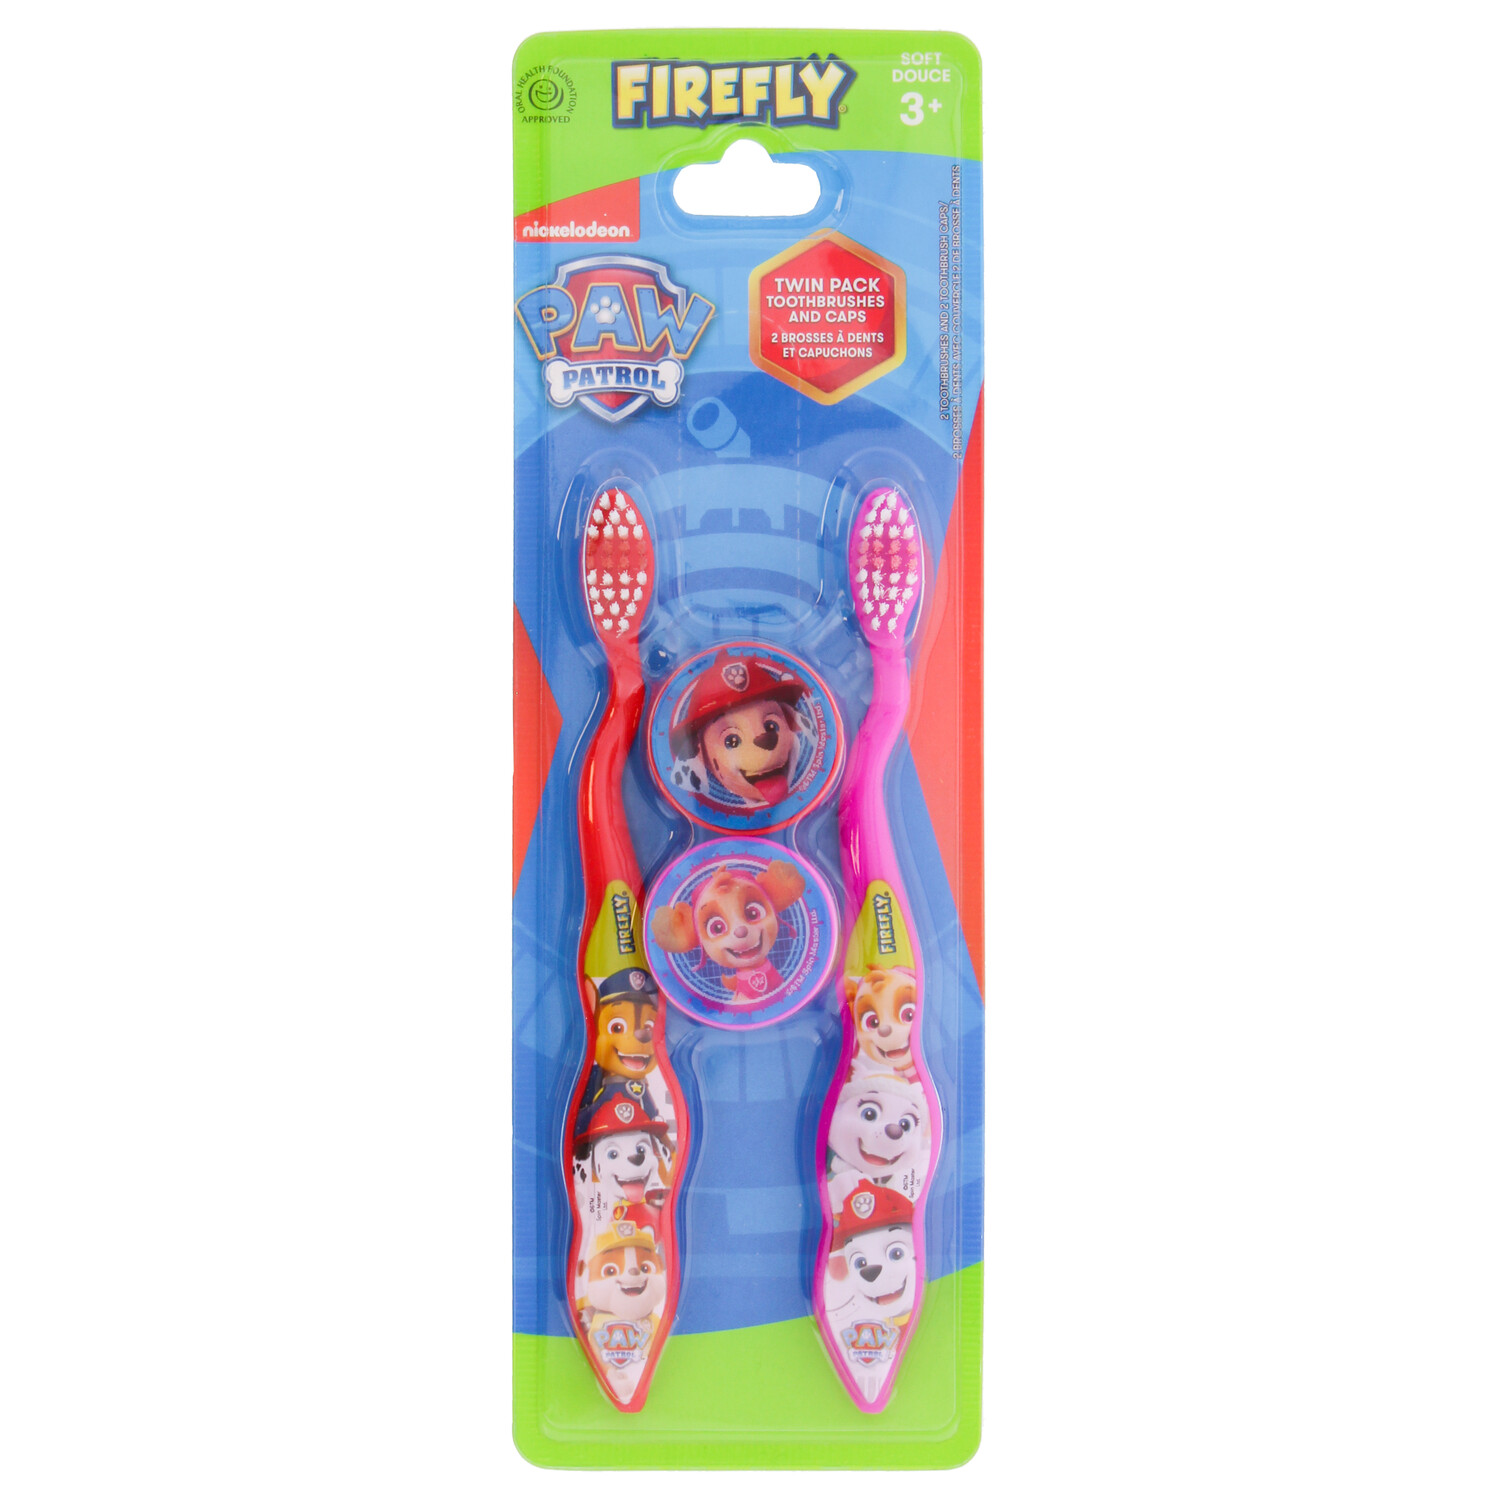 Pack of 2 Firefly Paw Patrol Toothbrushes and Caps Image 1